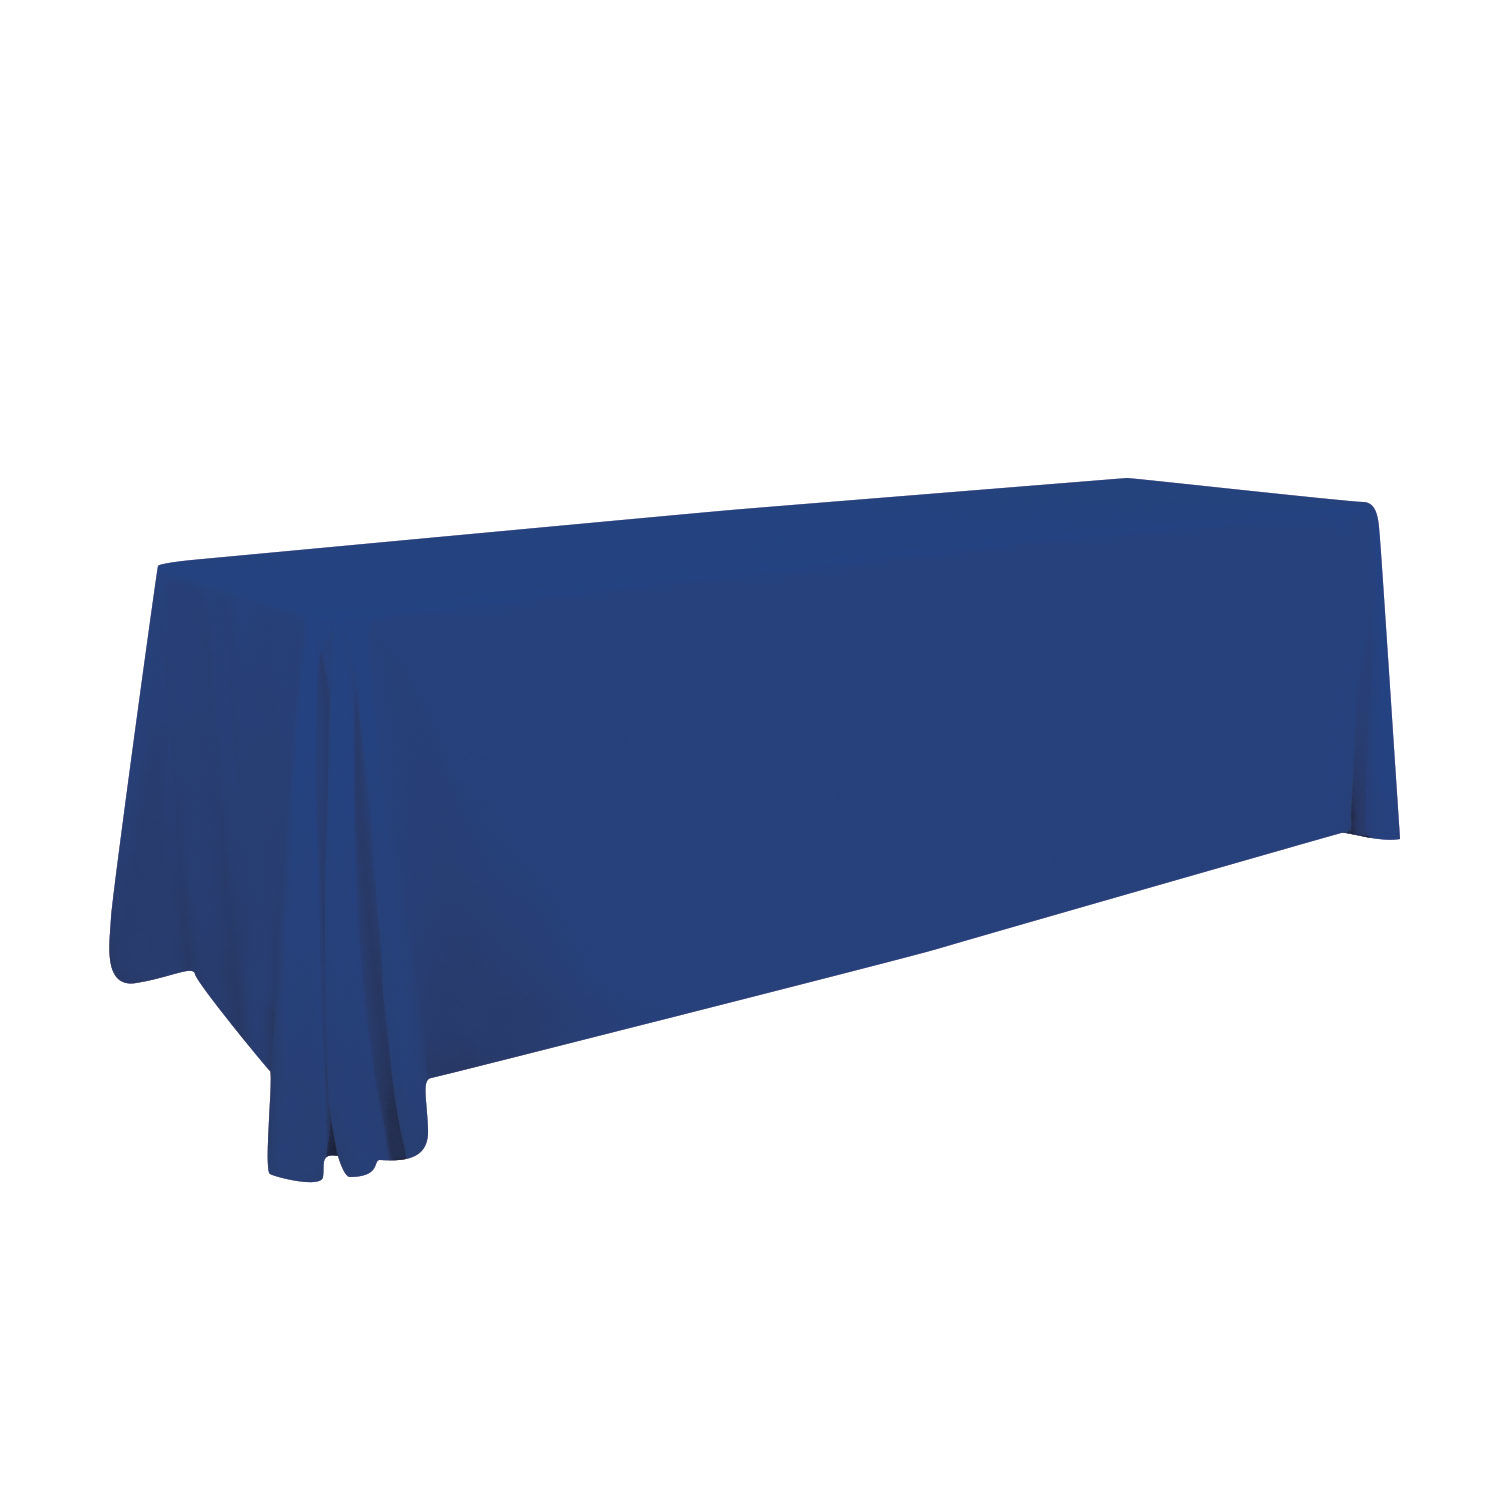 8' Value Lite Table Throw (Unimprinted)